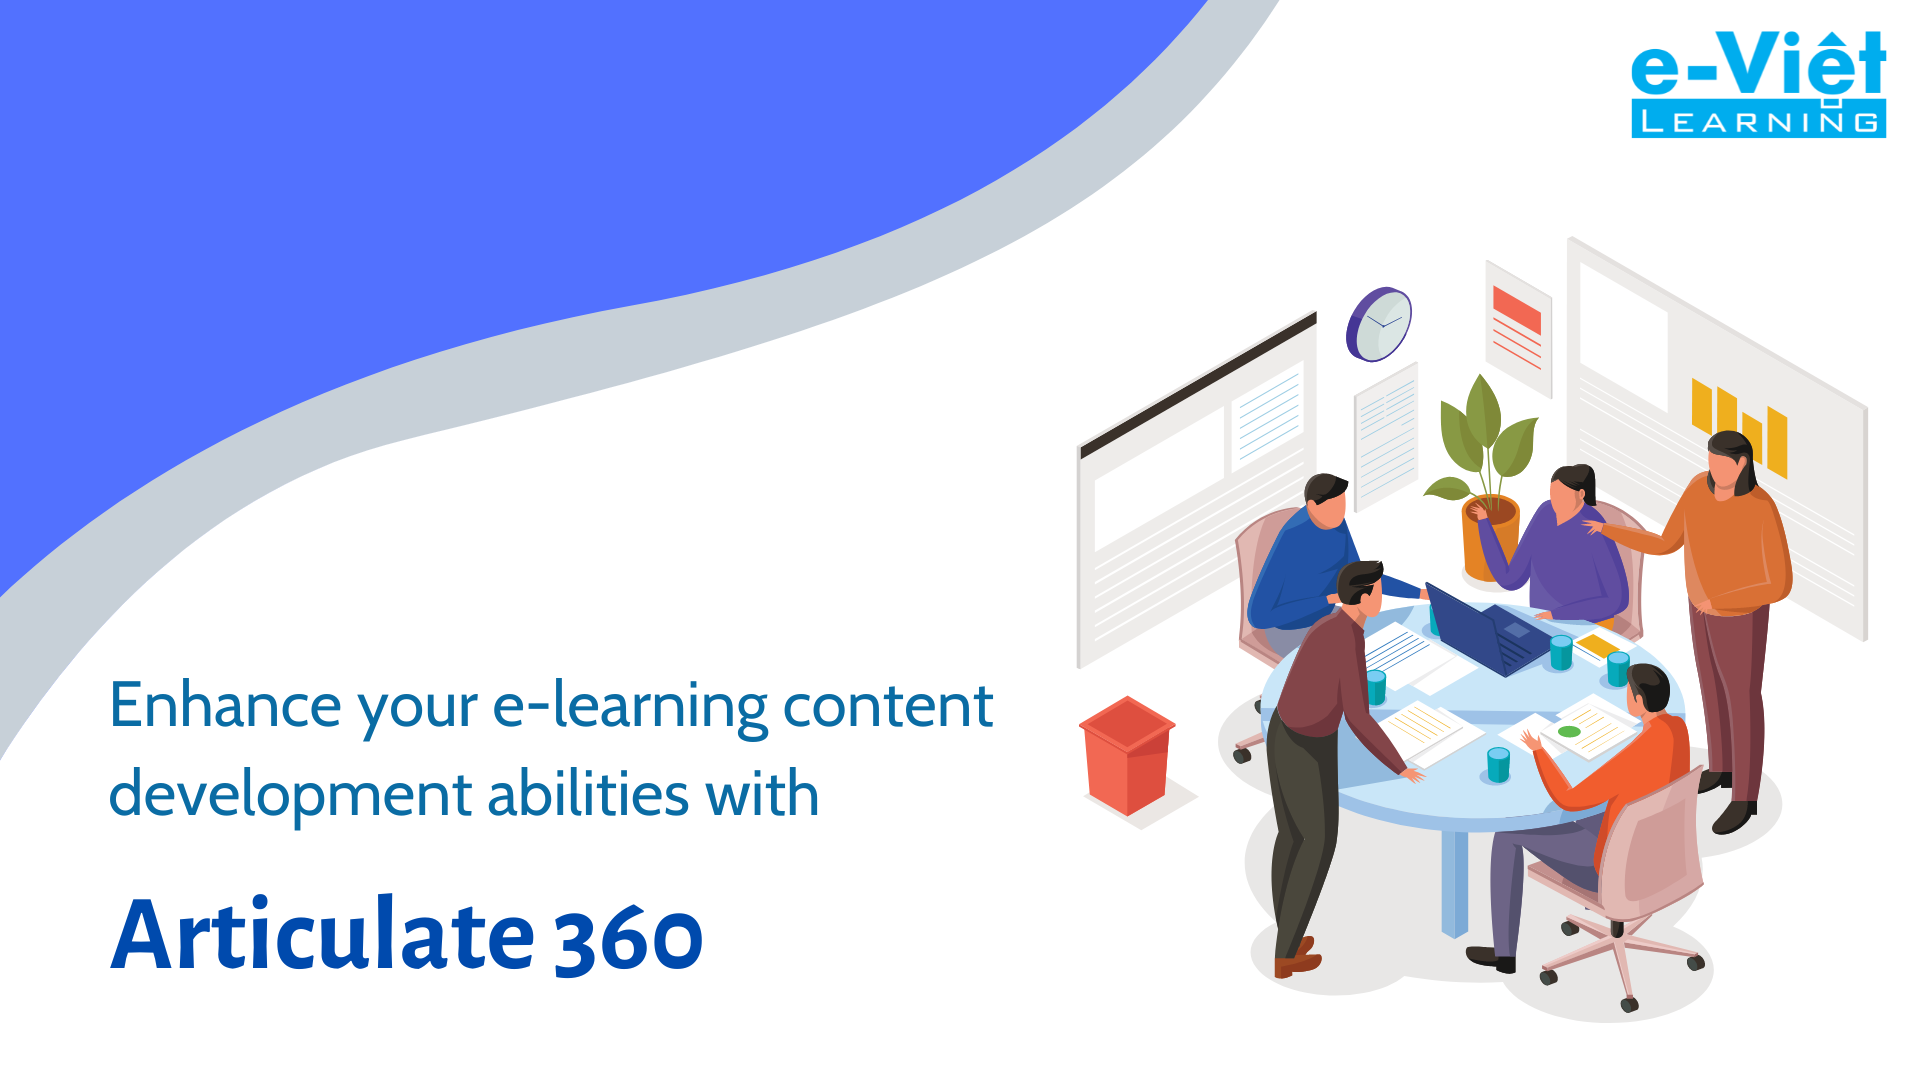 Enhance your e-learning content development abilities with Articulate 360